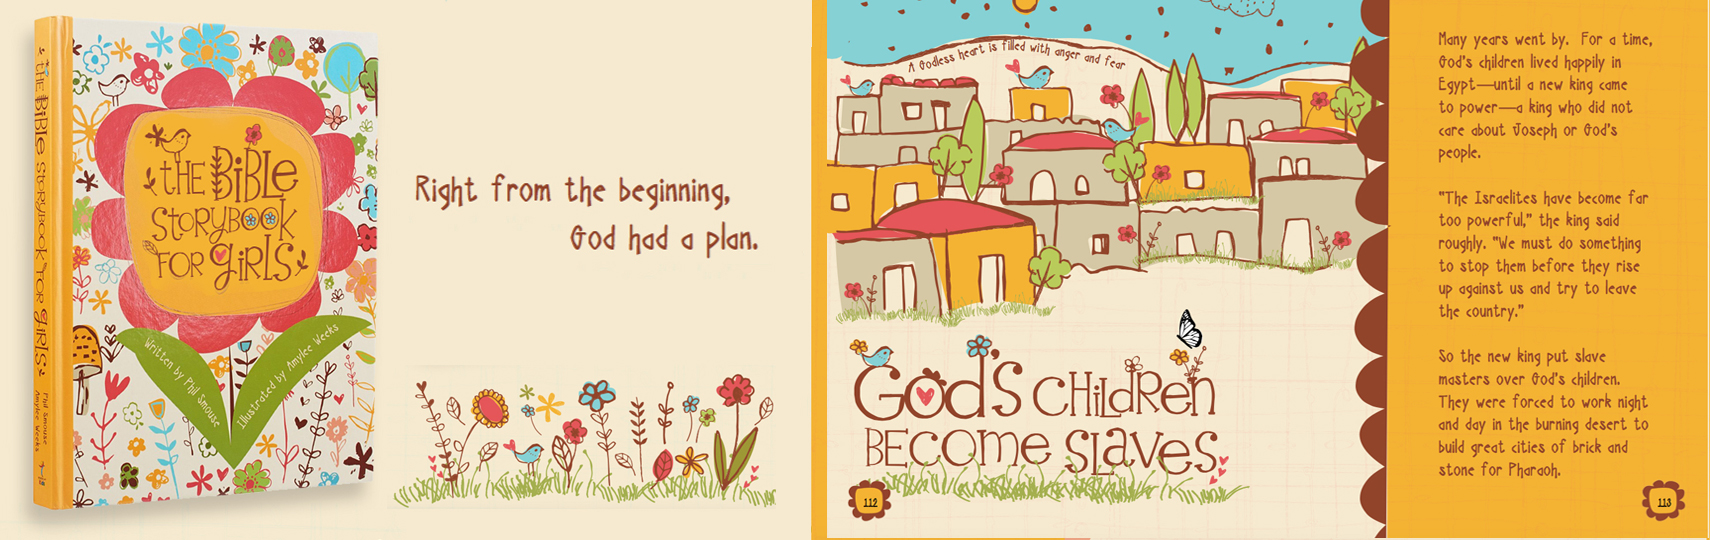 The Bible Storybook for Girls - Phil A. Smouse - Illustrated by Amylee Weeks